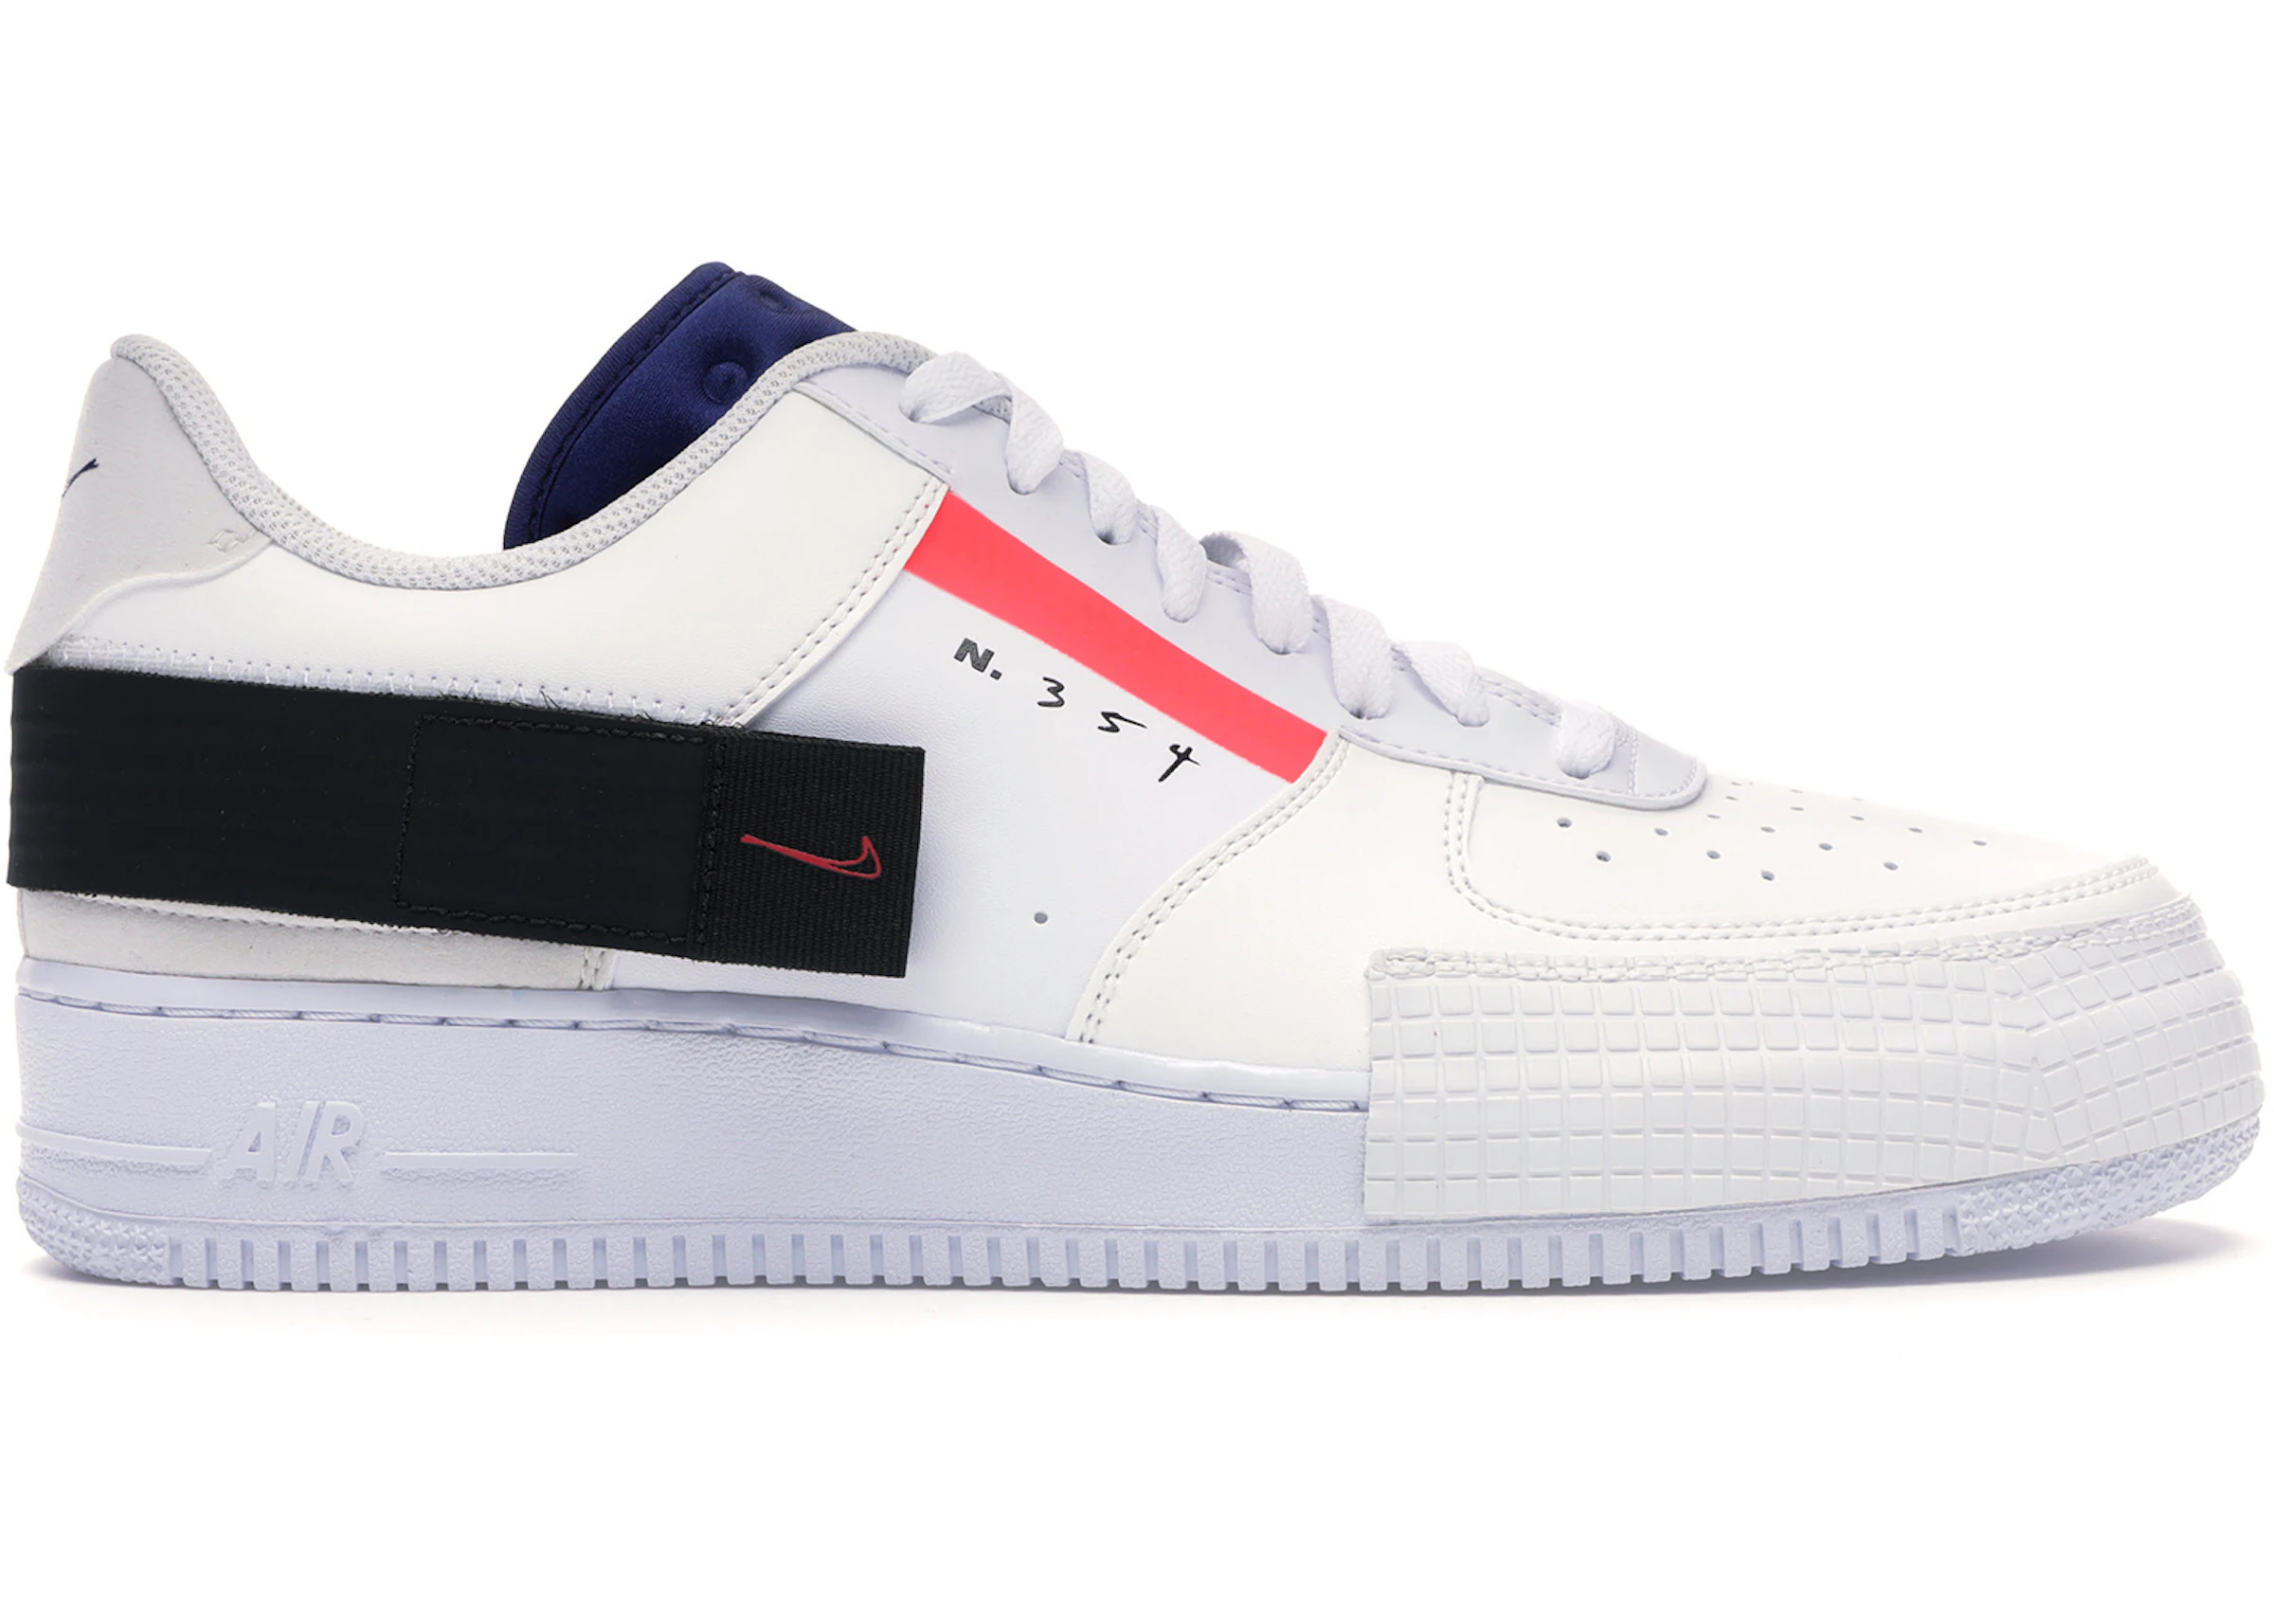 More Humiliate efficiently Nike Air Force 1 Type - CI0054-100 - US